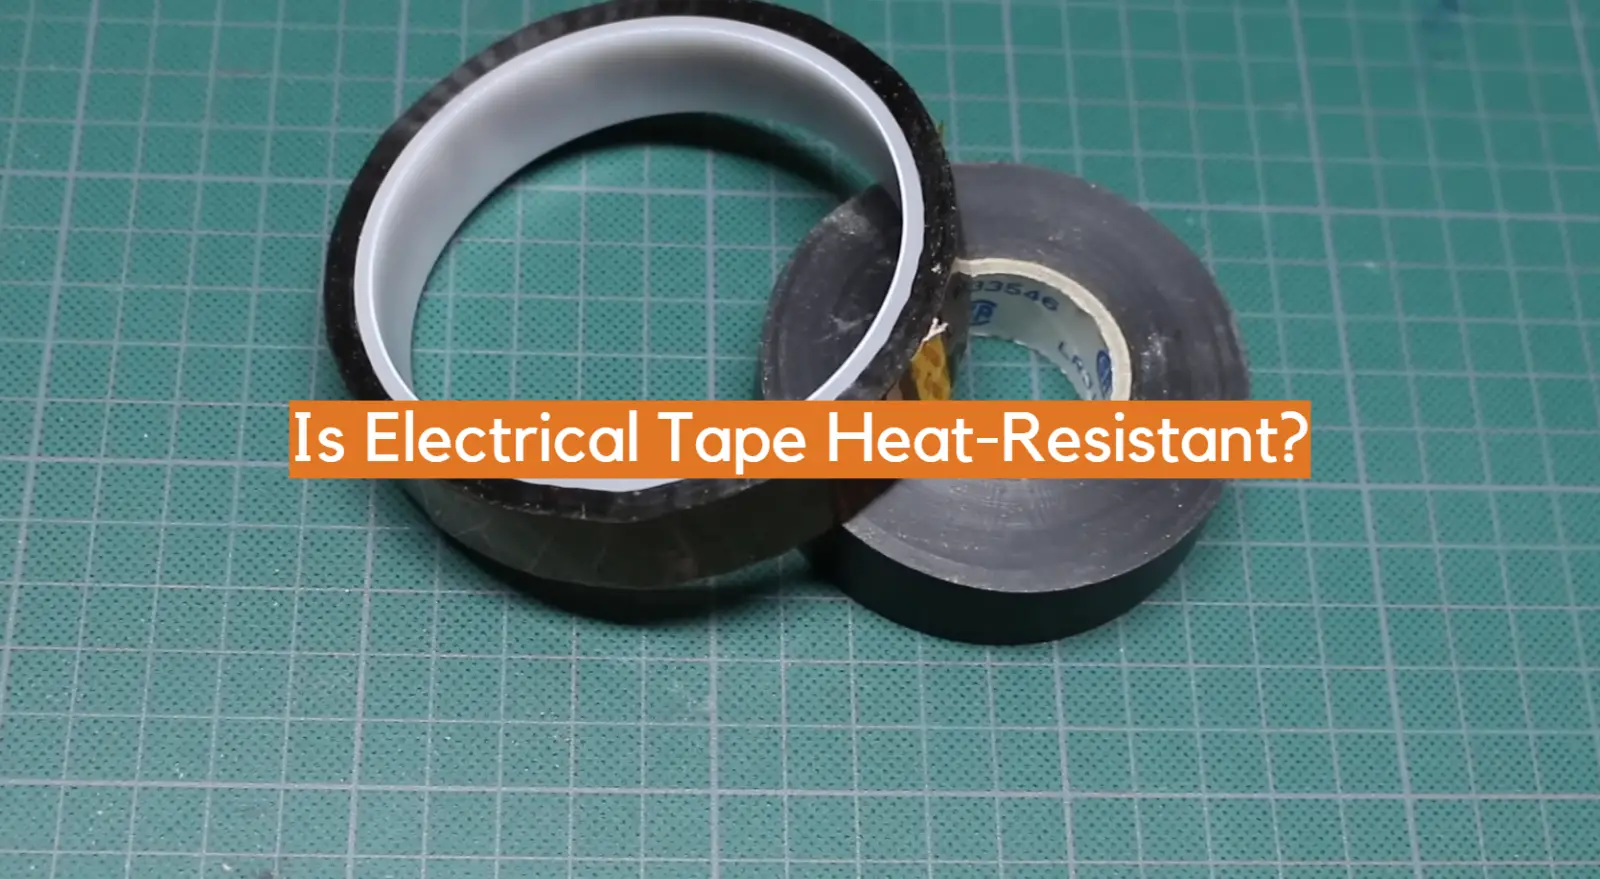 Is Electrical Tape Heat-Resistant?